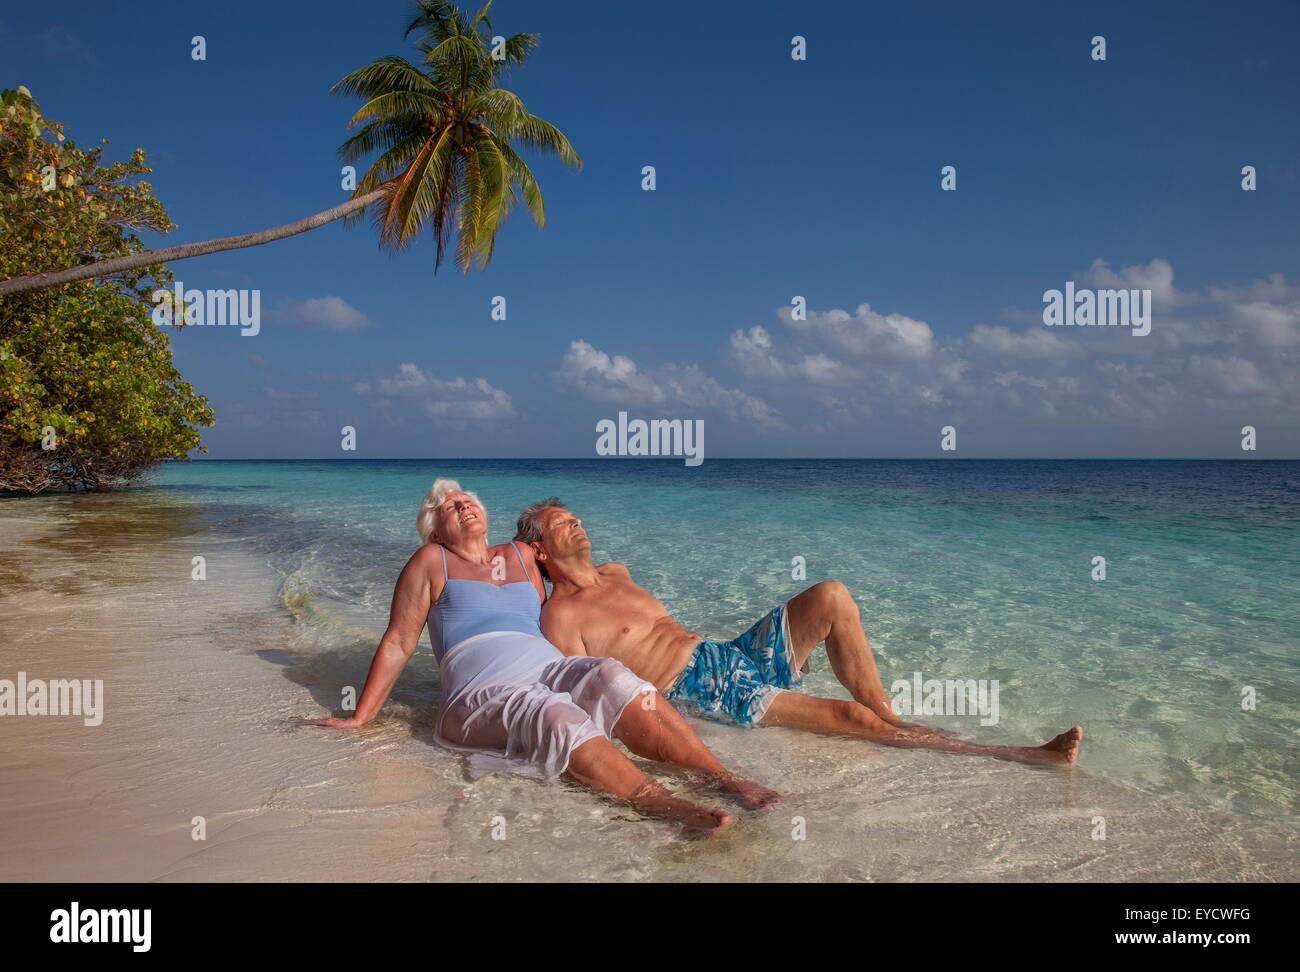 Senior couple relaxing on beach, Maldives Banque D'Images